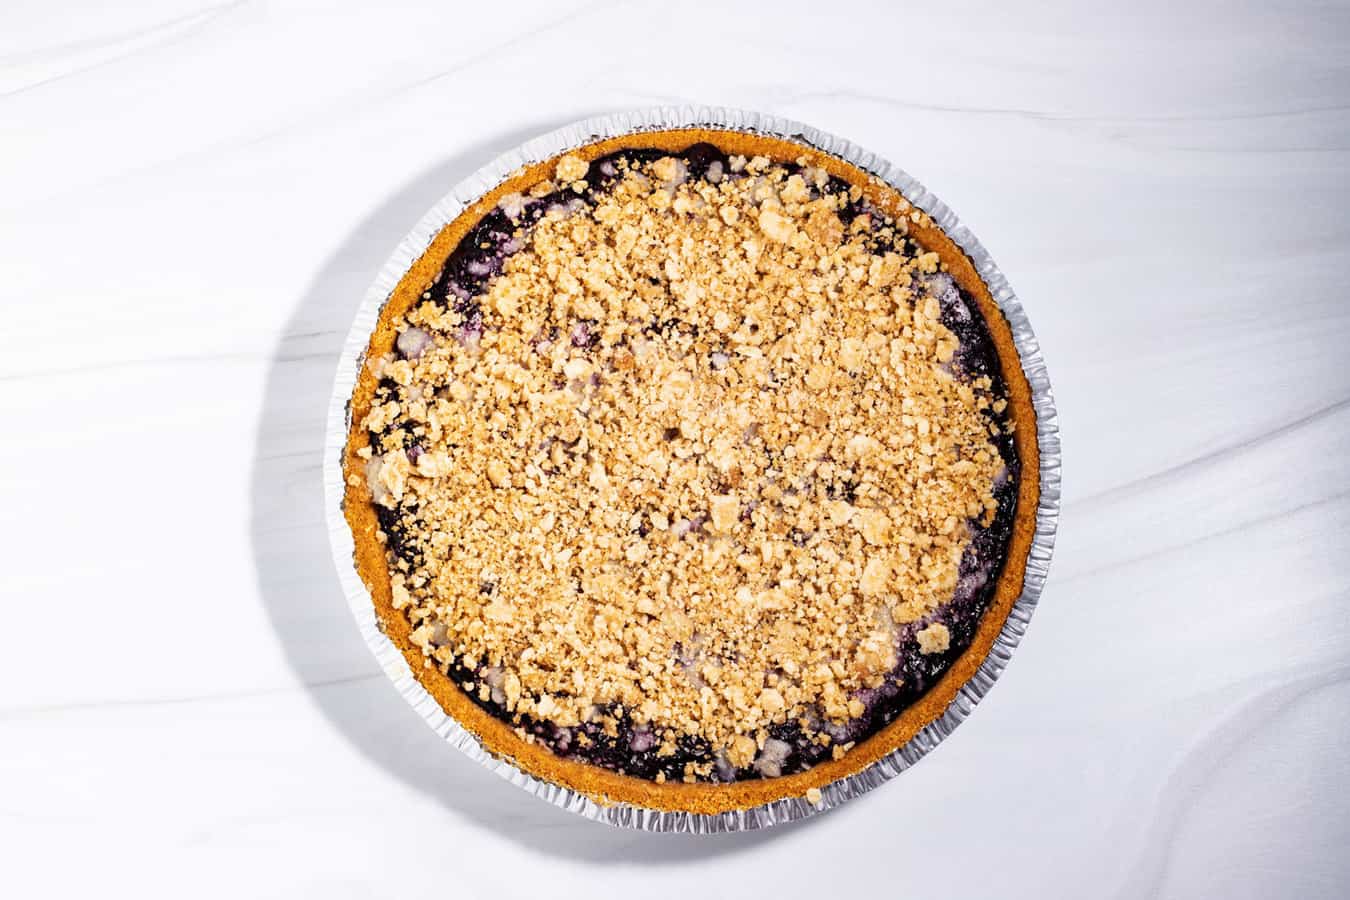 Blueberry pie with streusel topping and premade graham cracker crust.